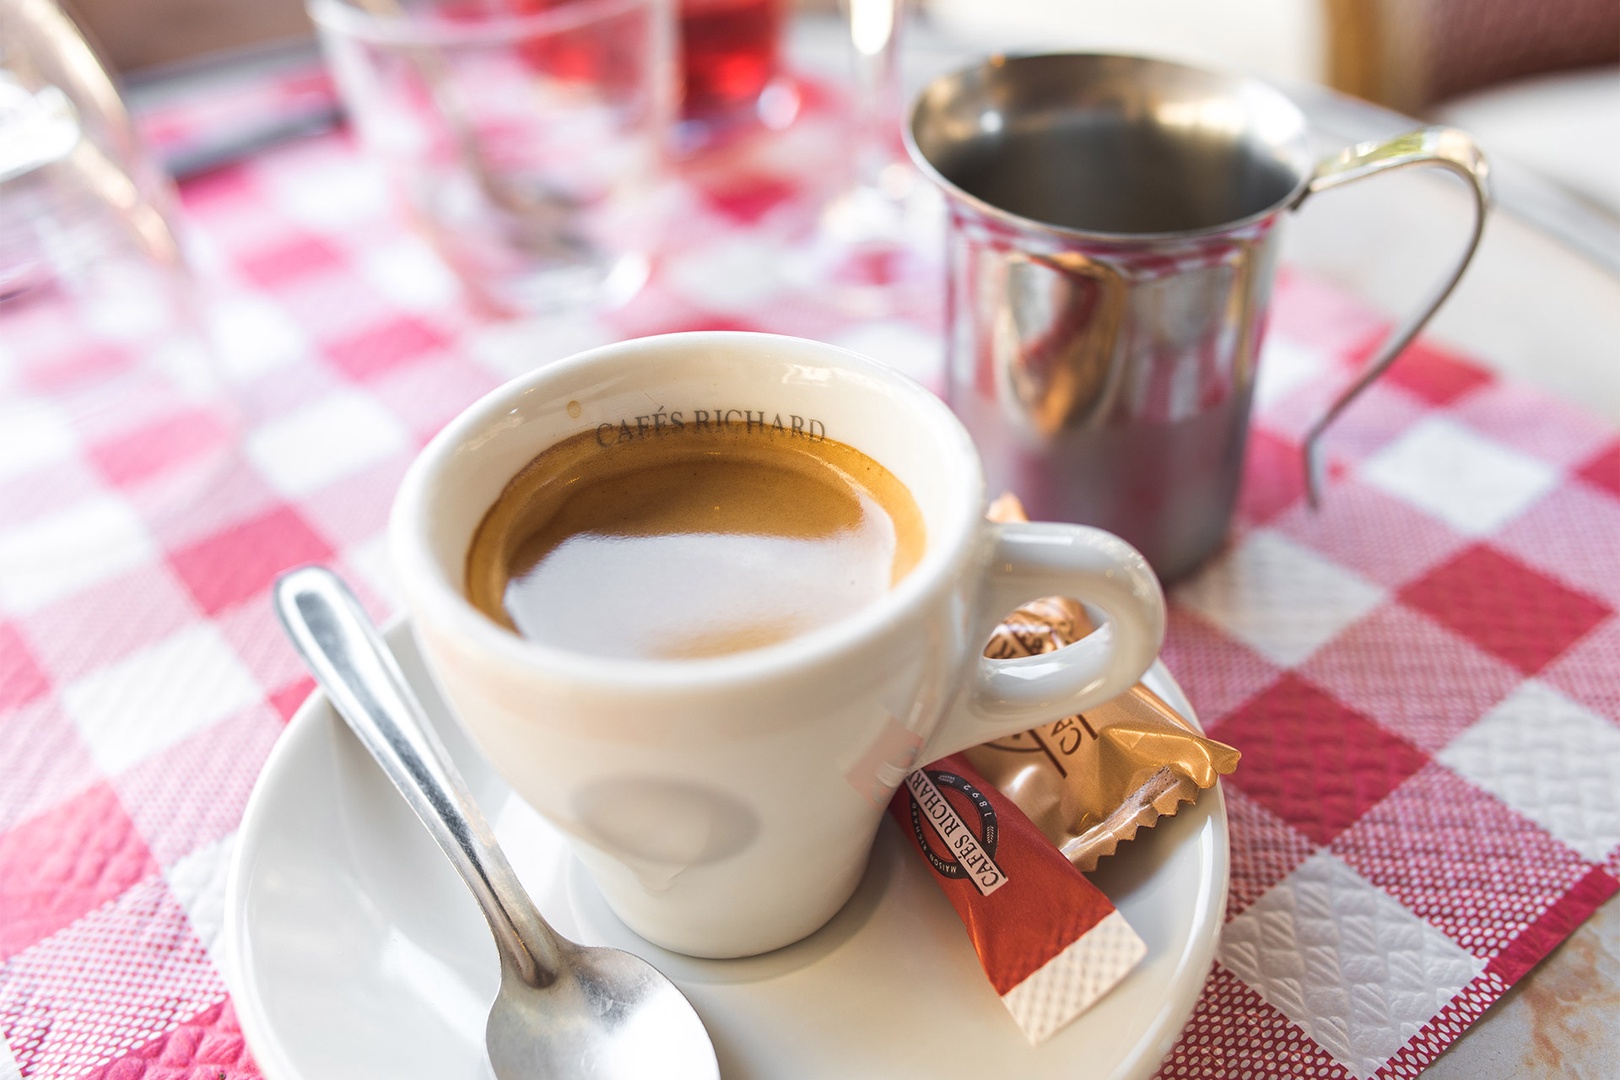 Sip an espresso at one of the local cafes